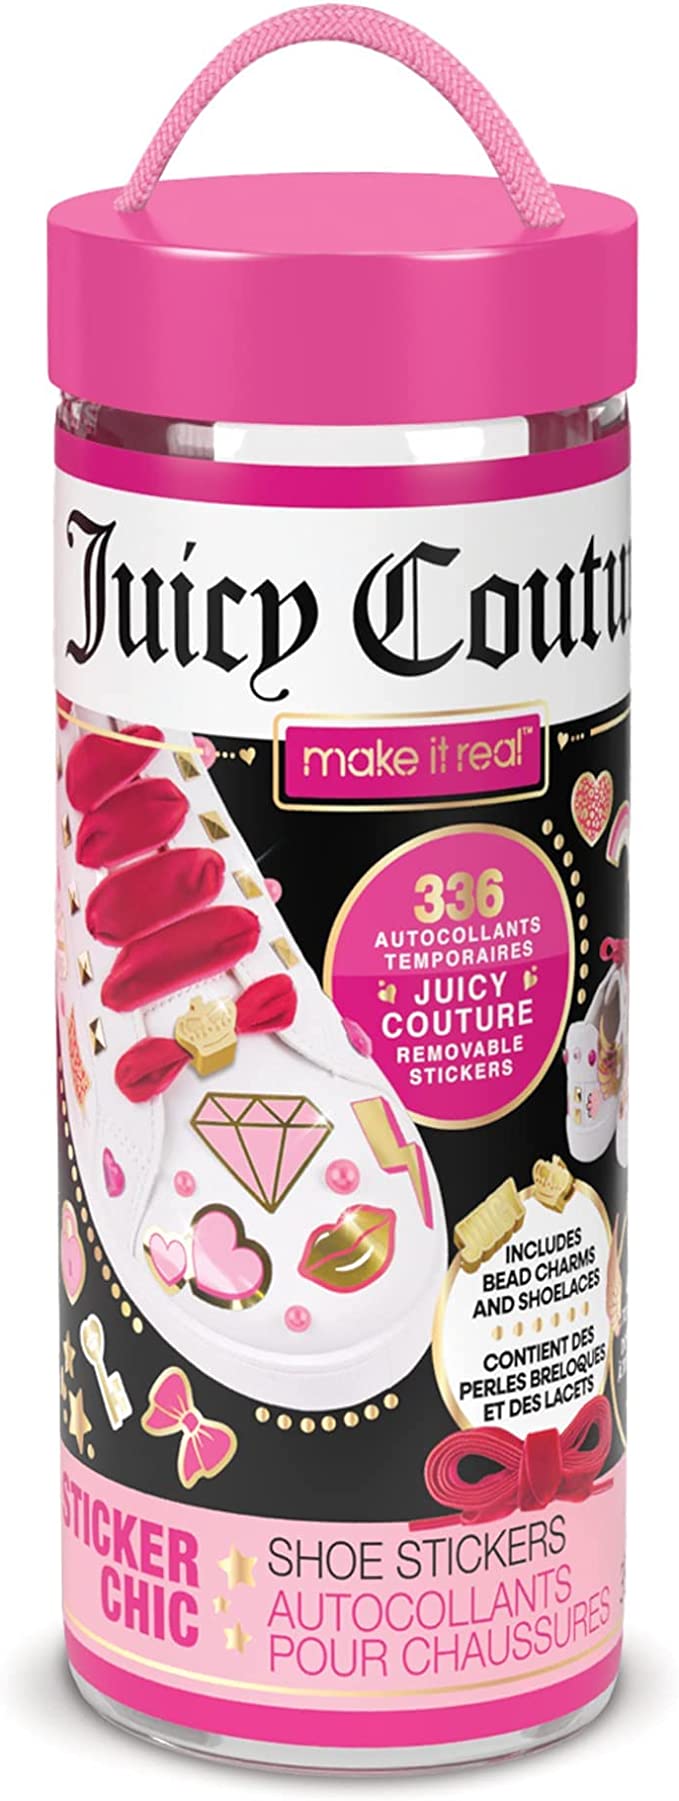 Make It Real Juicy Couture Sticker Shoe Stickers & Shoelace Charms for Trainers